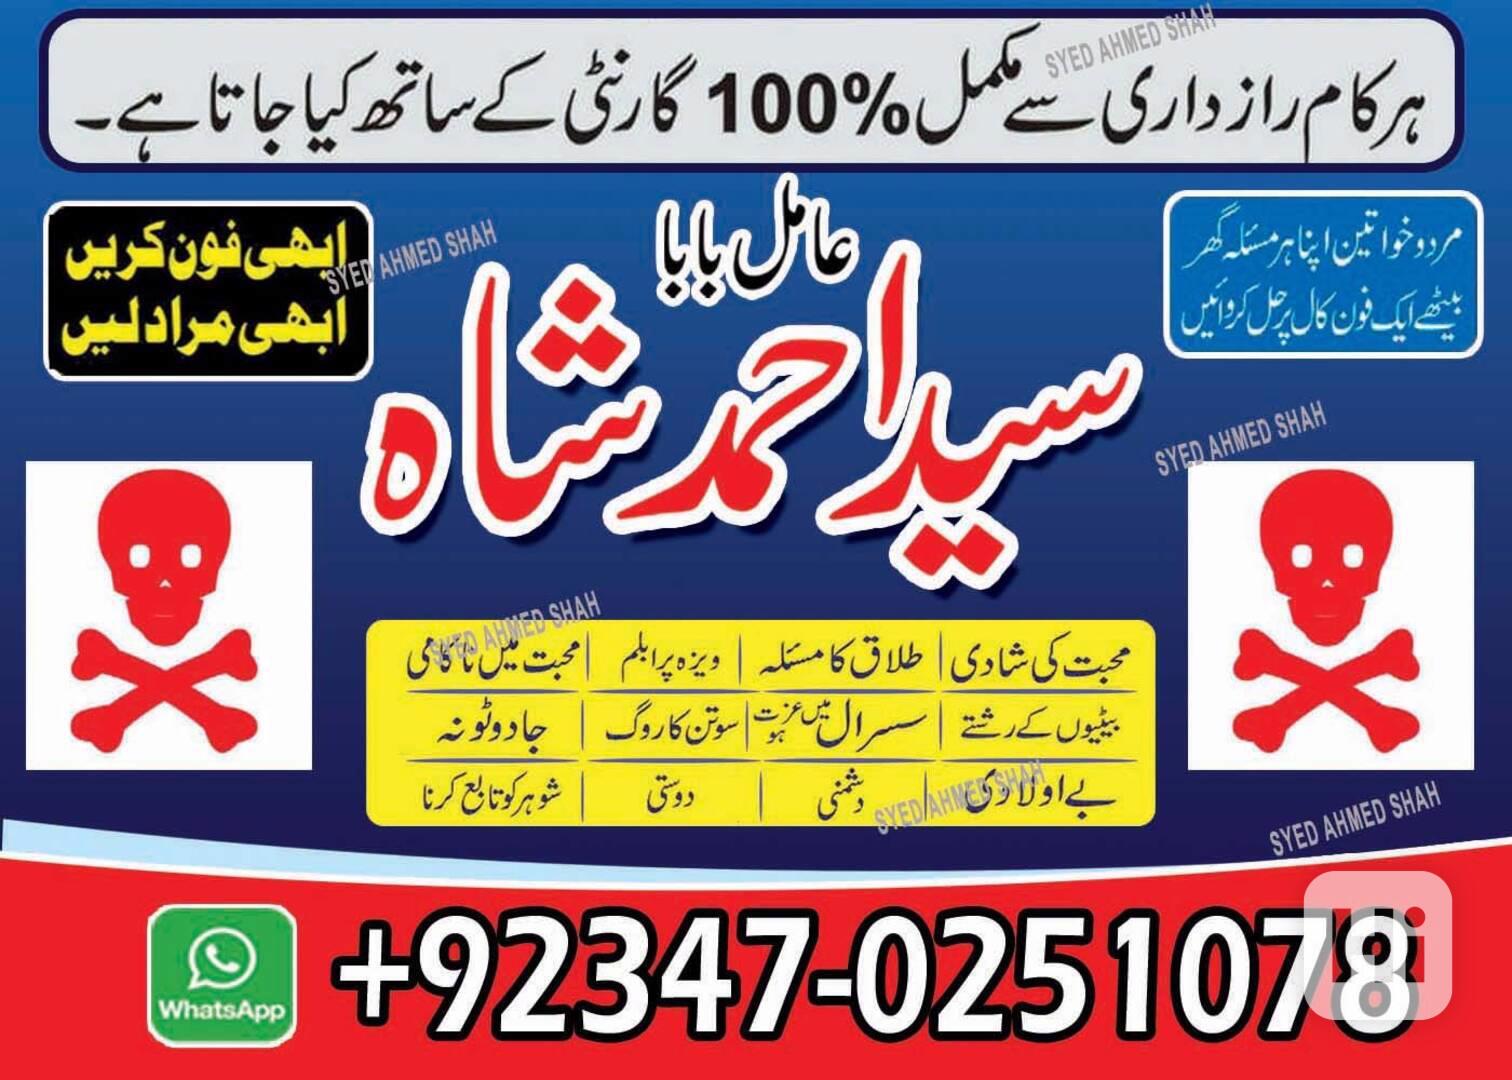 Amil baba in lahore 92+3470251078